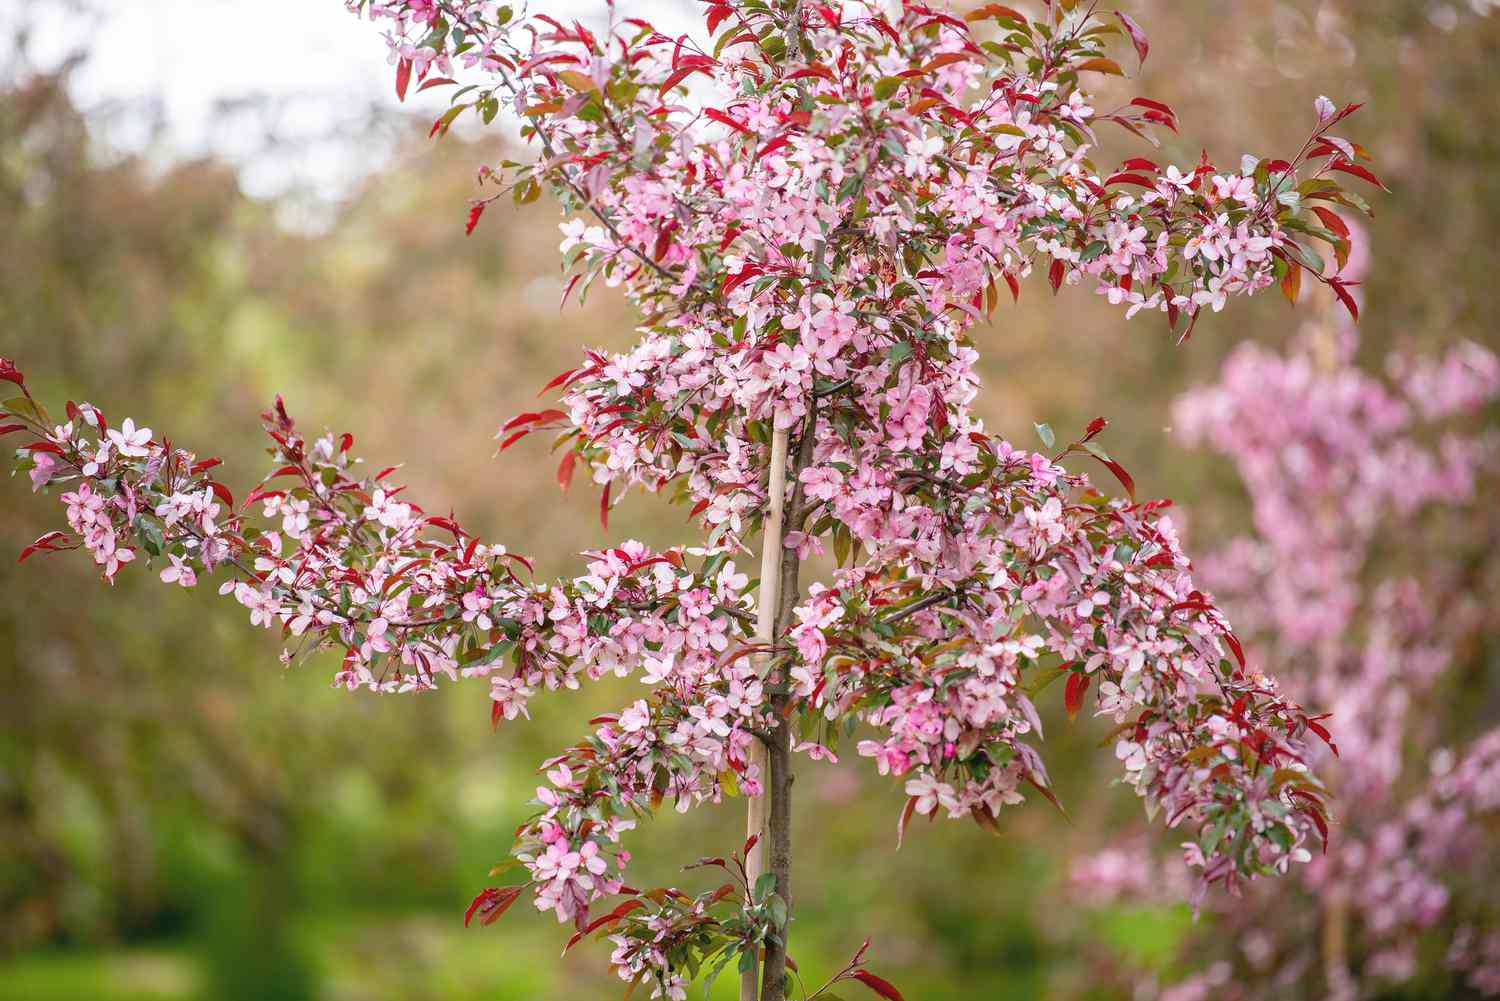 Crabapple tree with small pink blossoms on branches with red leaves